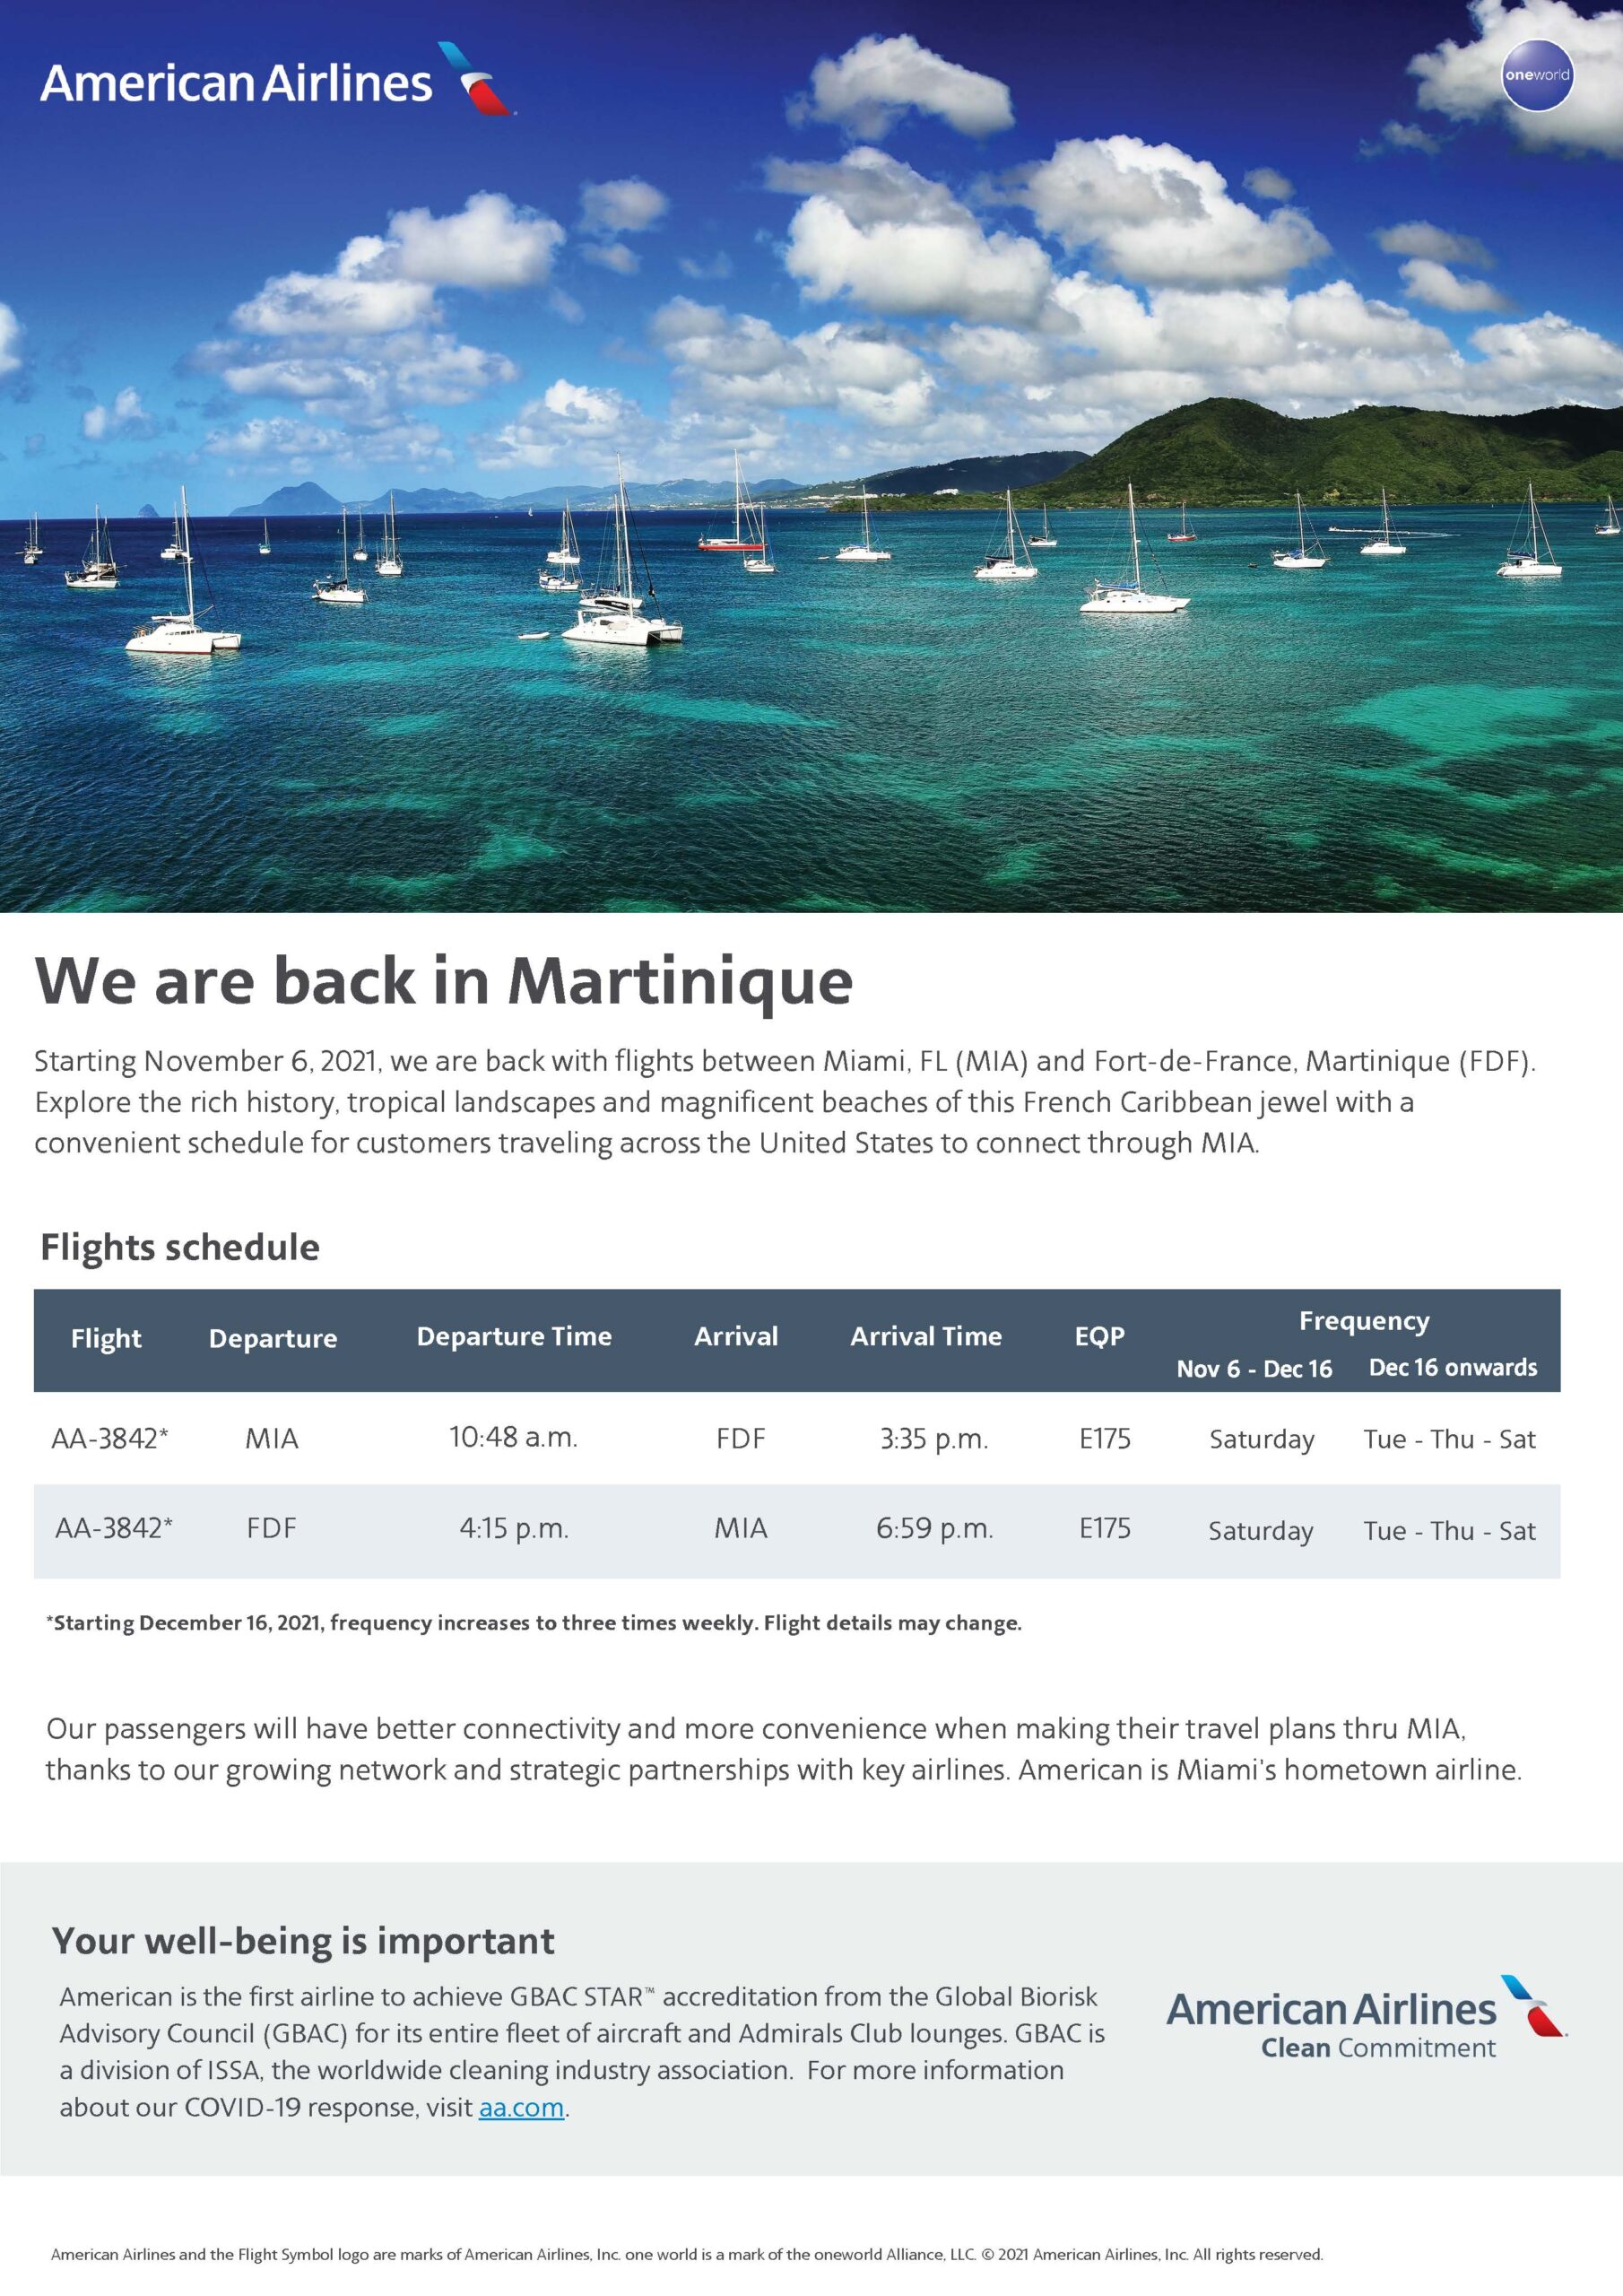 We are back in Martinique